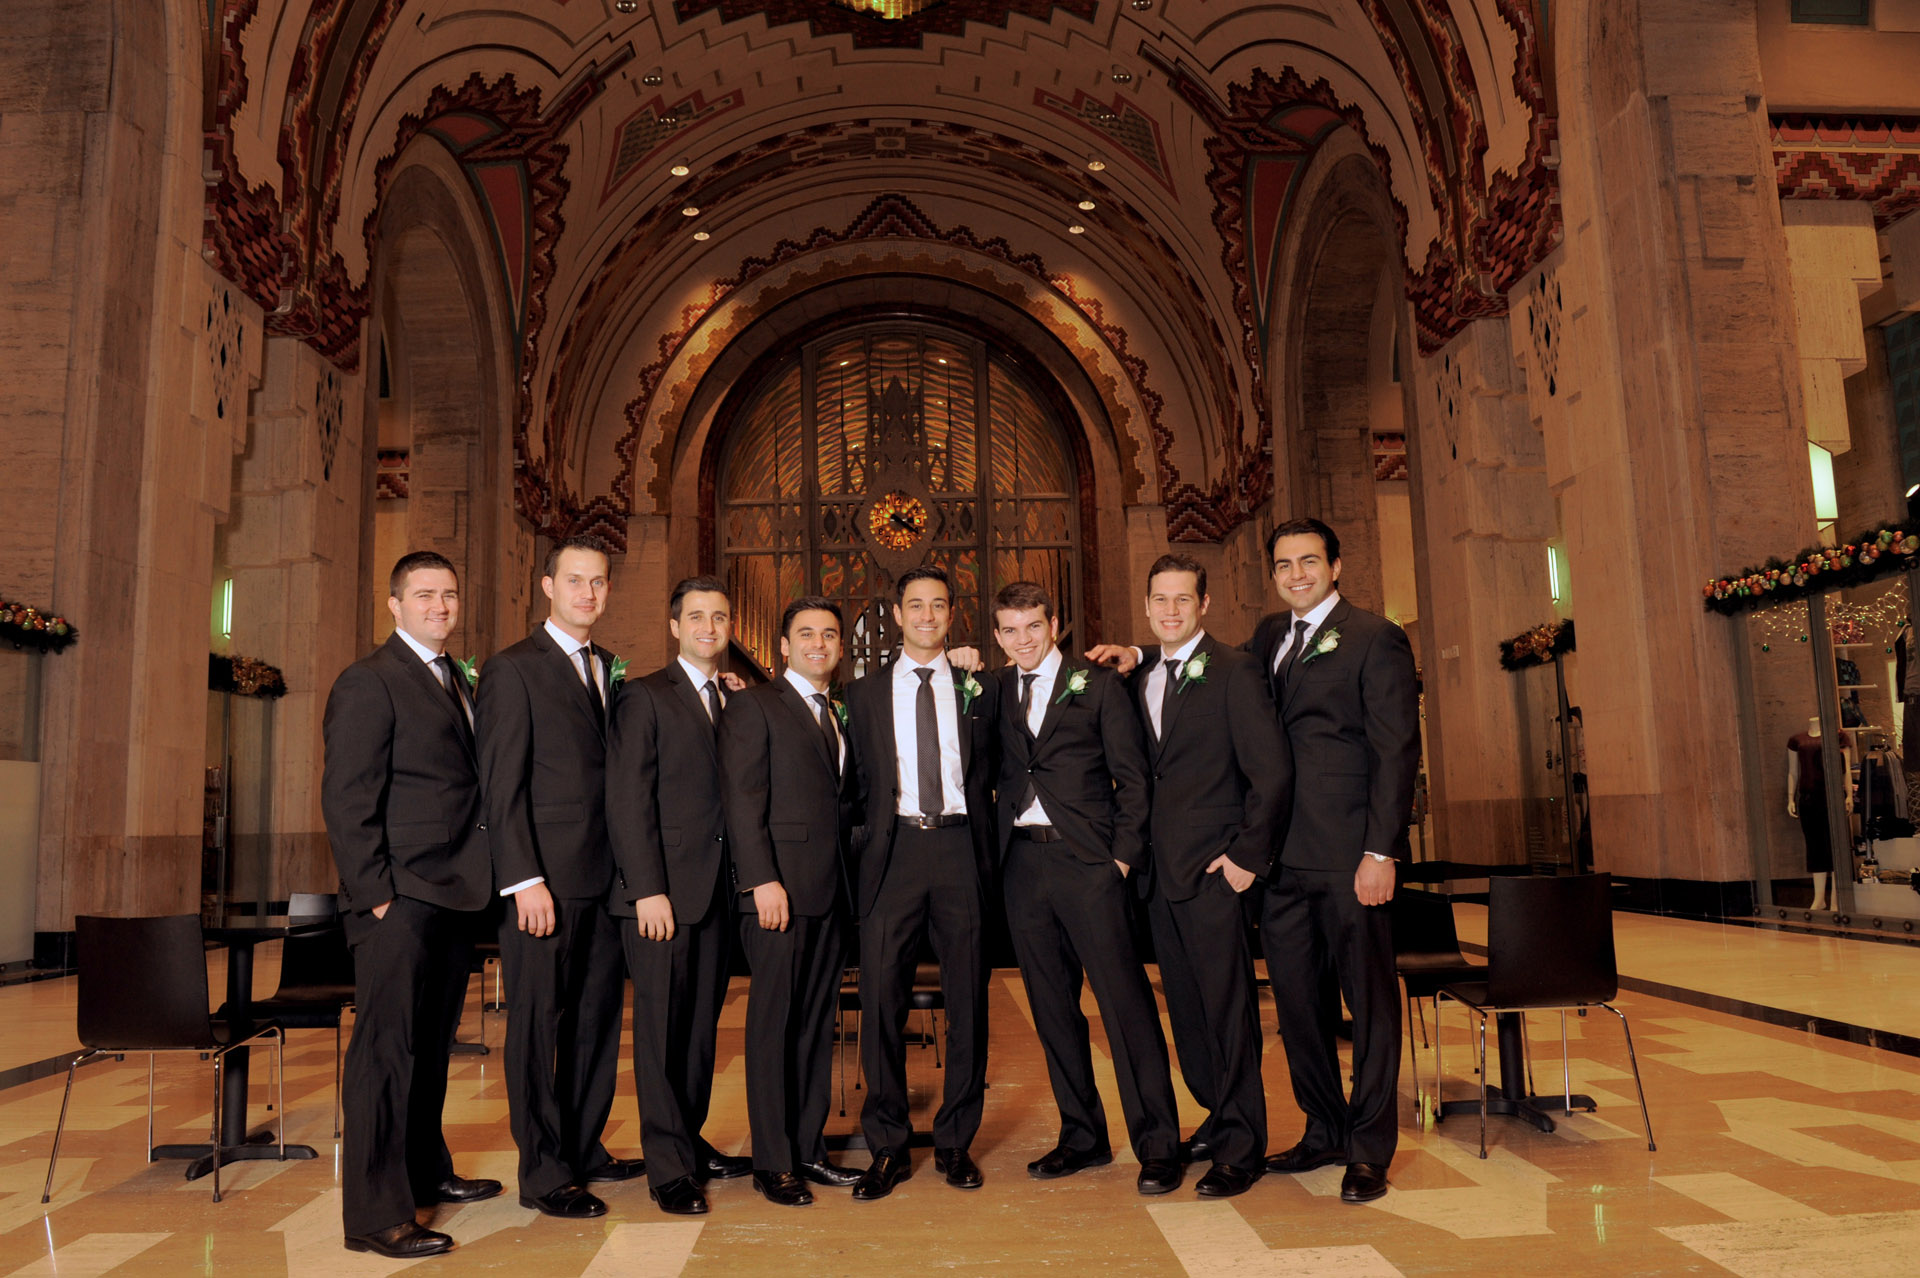 The Historic church Sweetest Heart of Mary and the Dearborn Inn of Detroit's historic church in Detroit and Dearborn, Michigan wedding photographer's photo of the groomsman at the historic Guardian building for wedding photos in Detroit, Michigan.